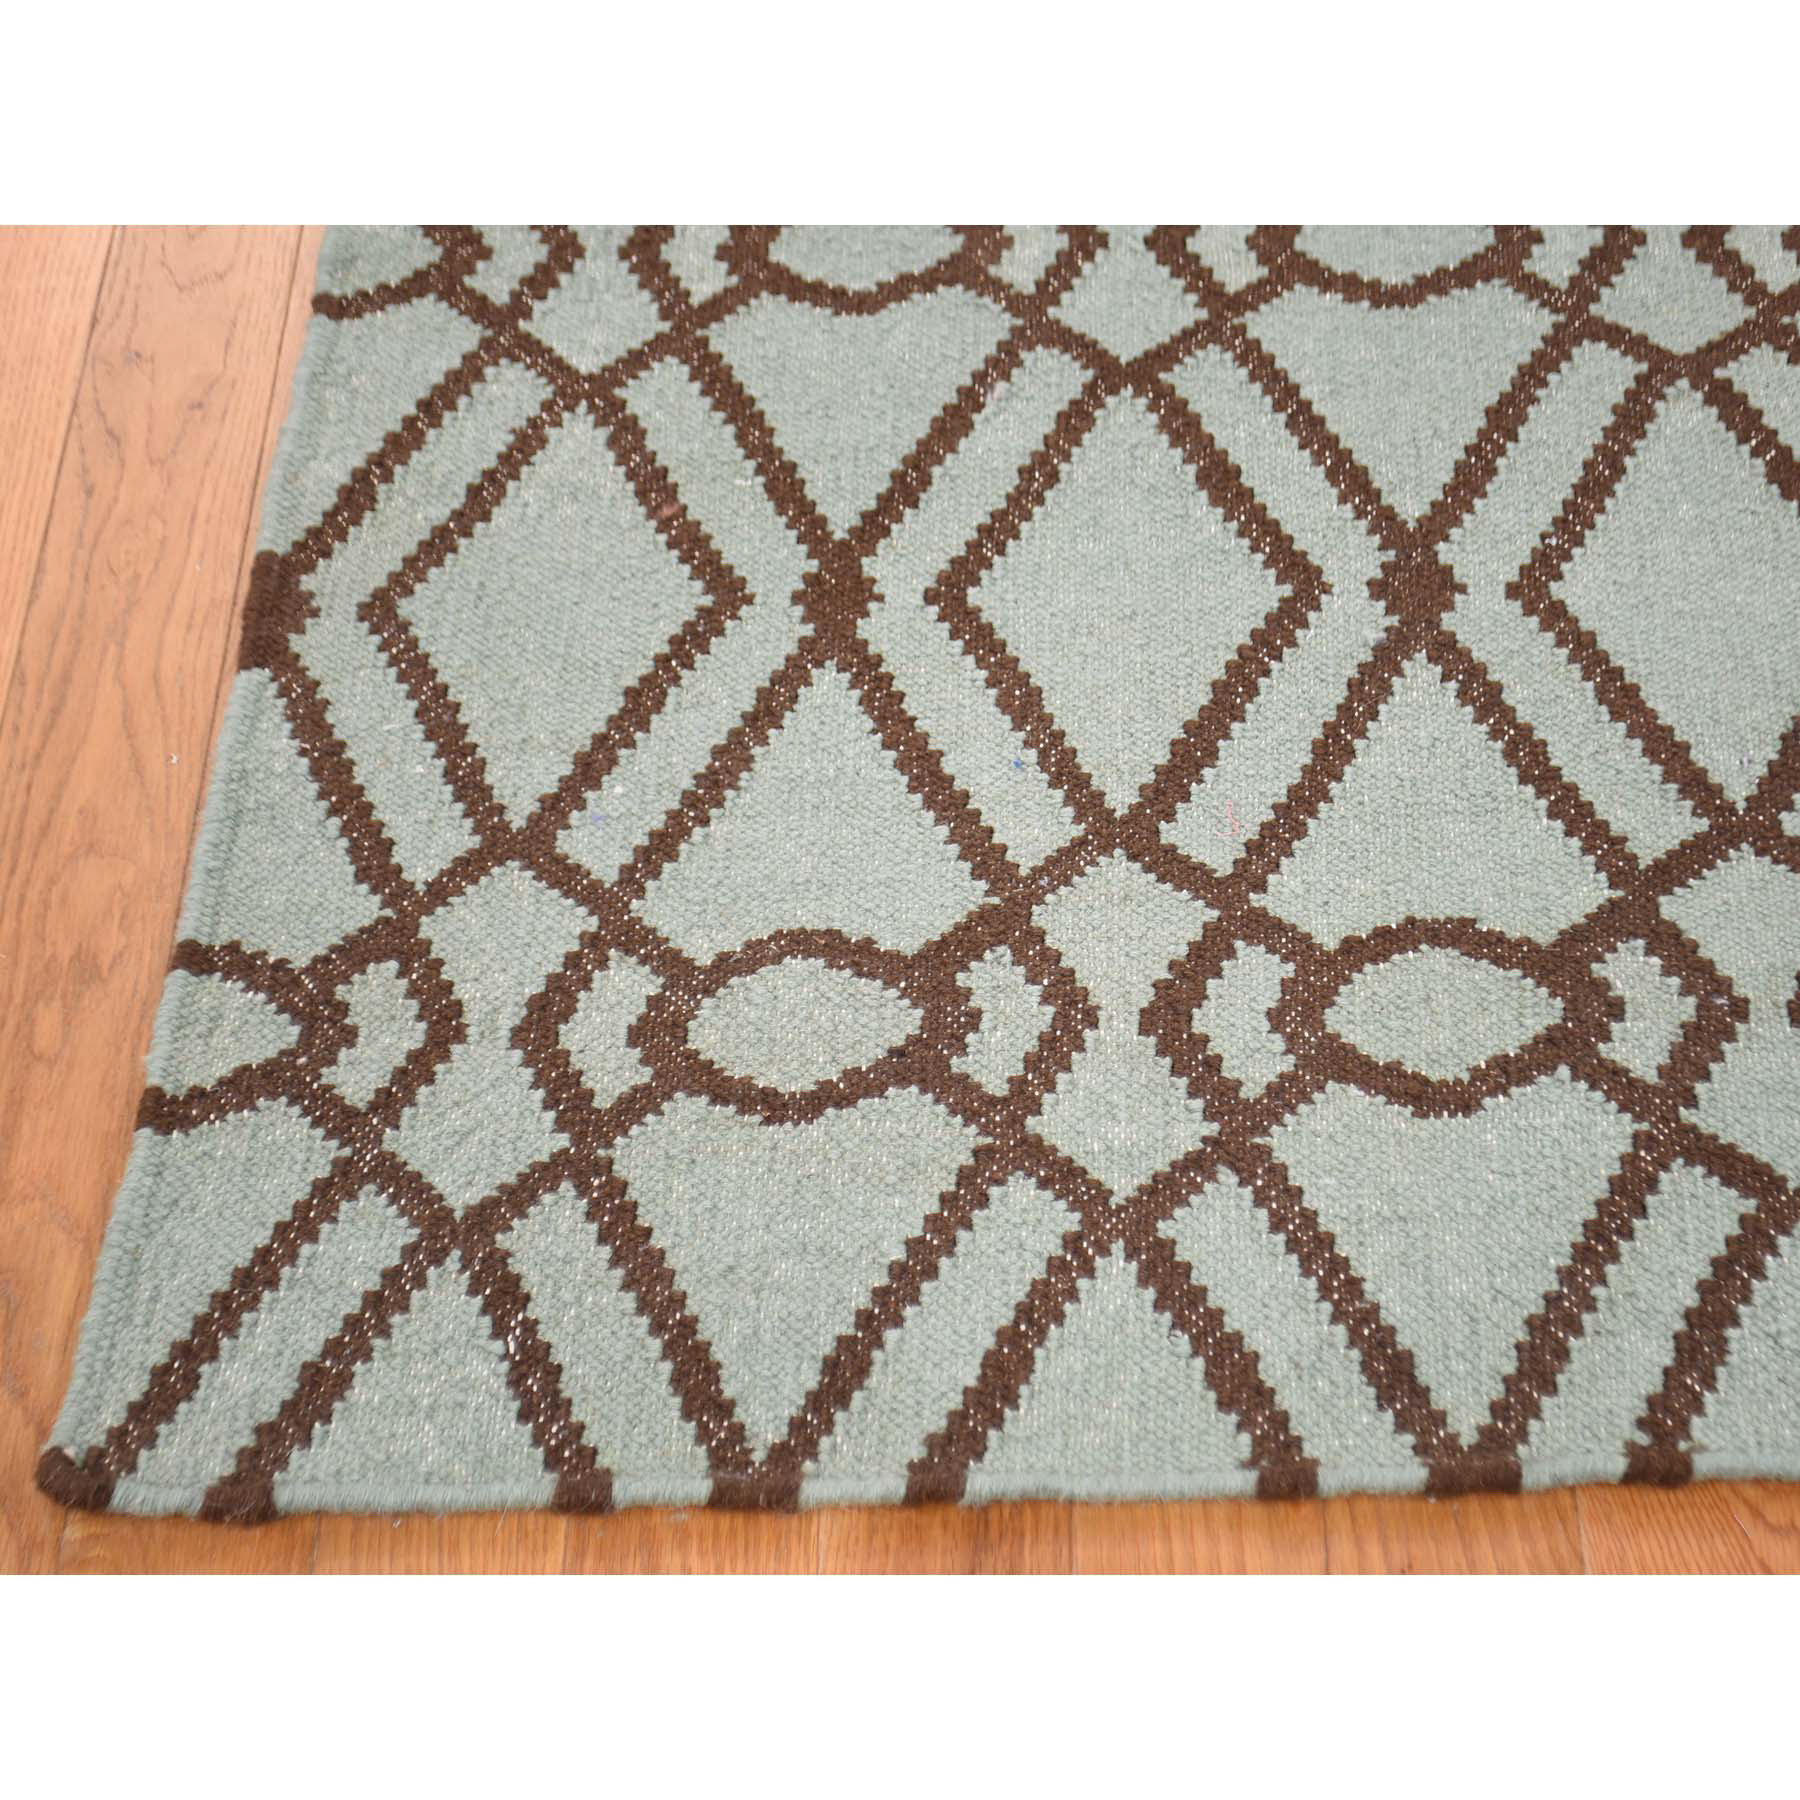 5-5--x7-2-- Hand-Woven Pure Wool Durie Kilim Reversible Oriental Rug 